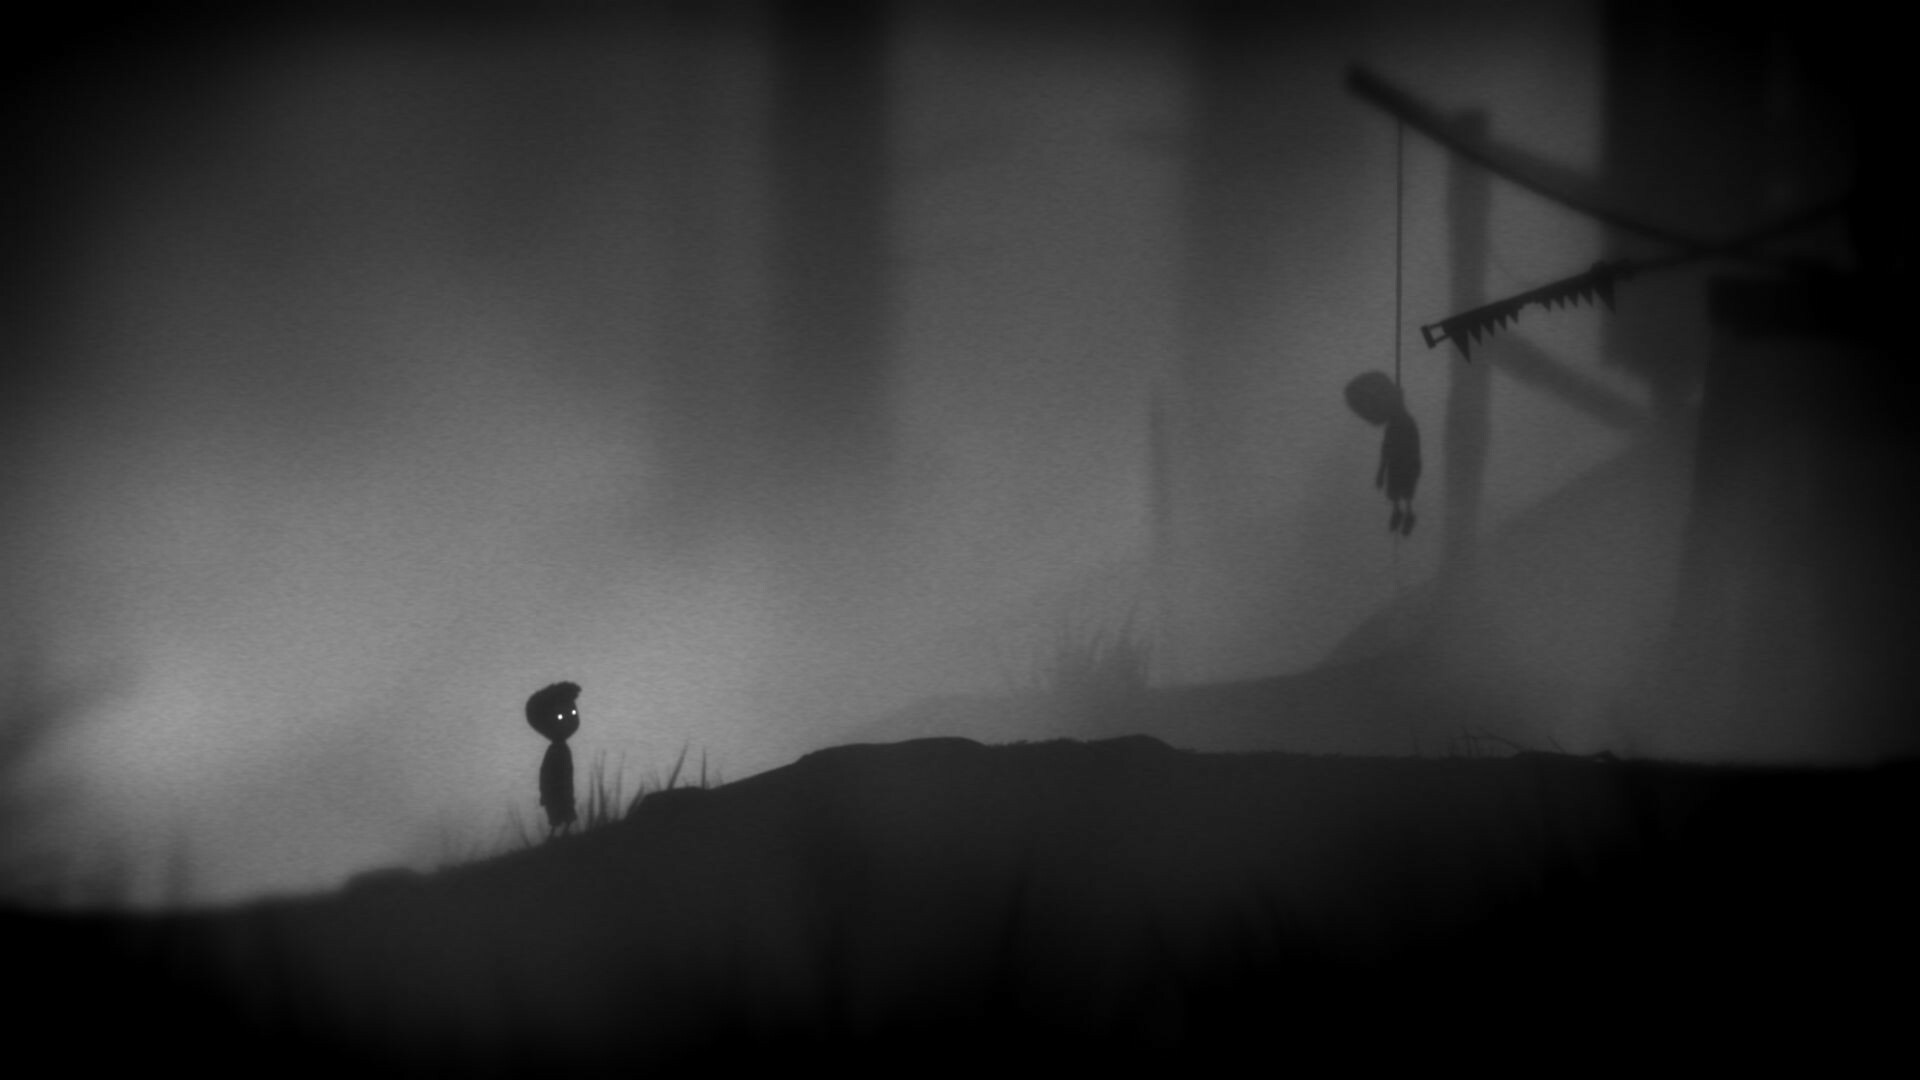 Limbo: At E3 2010—about a month before its release—the game won GameSpot's "Best Downloadable Game", and was nominated for several other "Best of Show" awards. 1920x1080 Full HD Wallpaper.